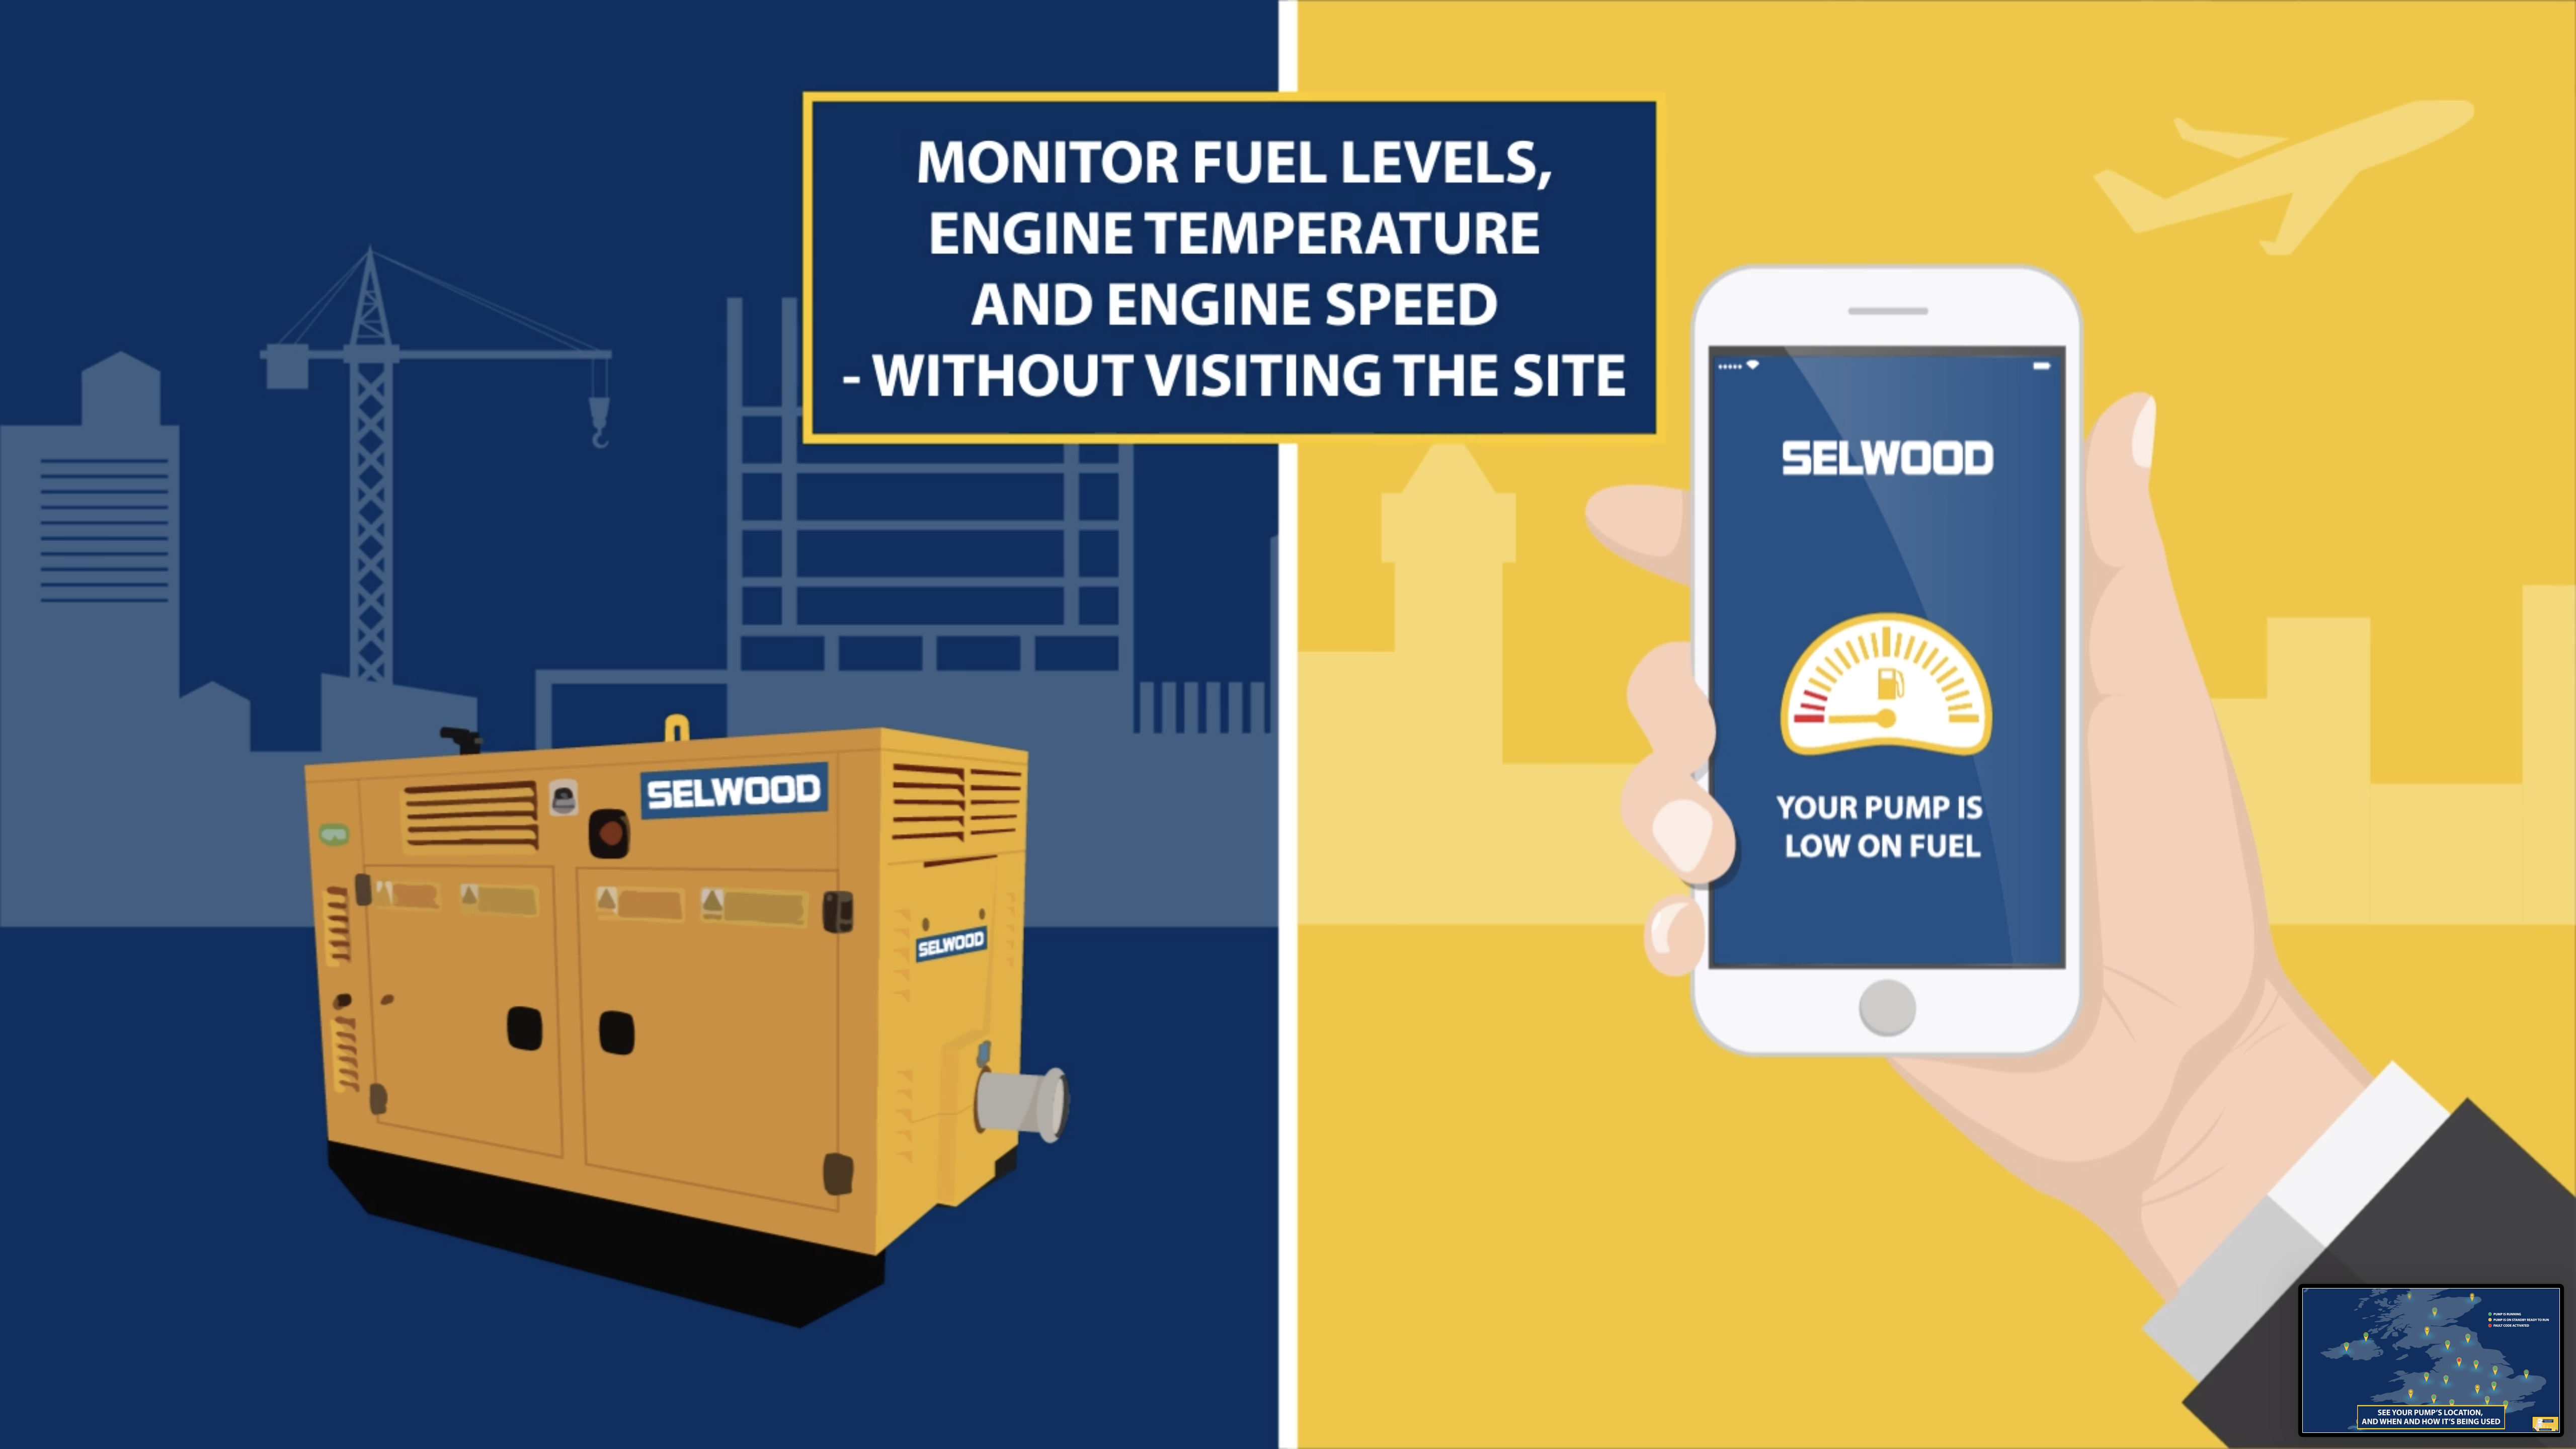 Selwood's new SelWatch technology is a remote Cloud-based telematics tool that offers real-time performance monitoring.